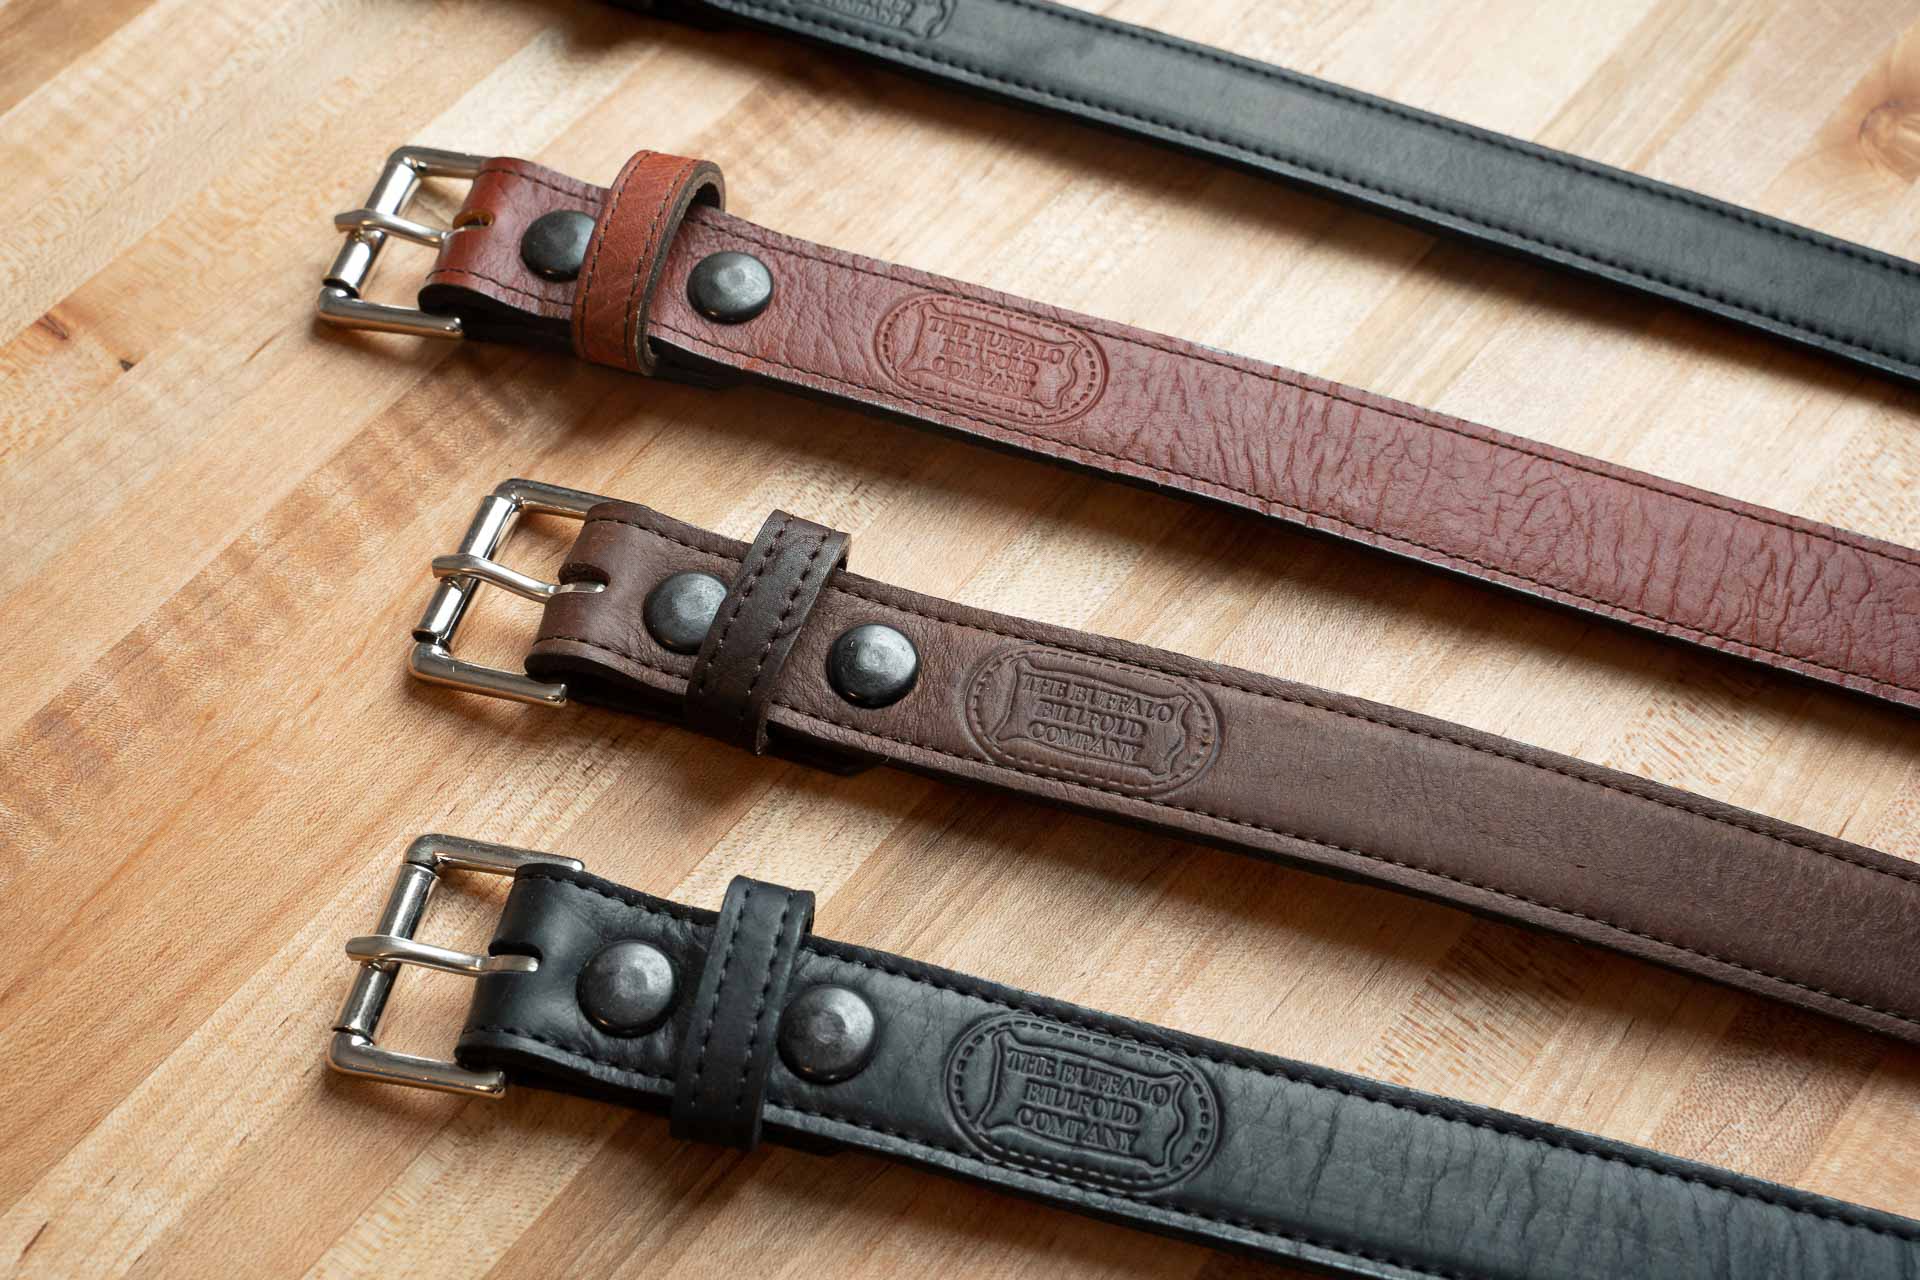 Leather Belts - Made in USA